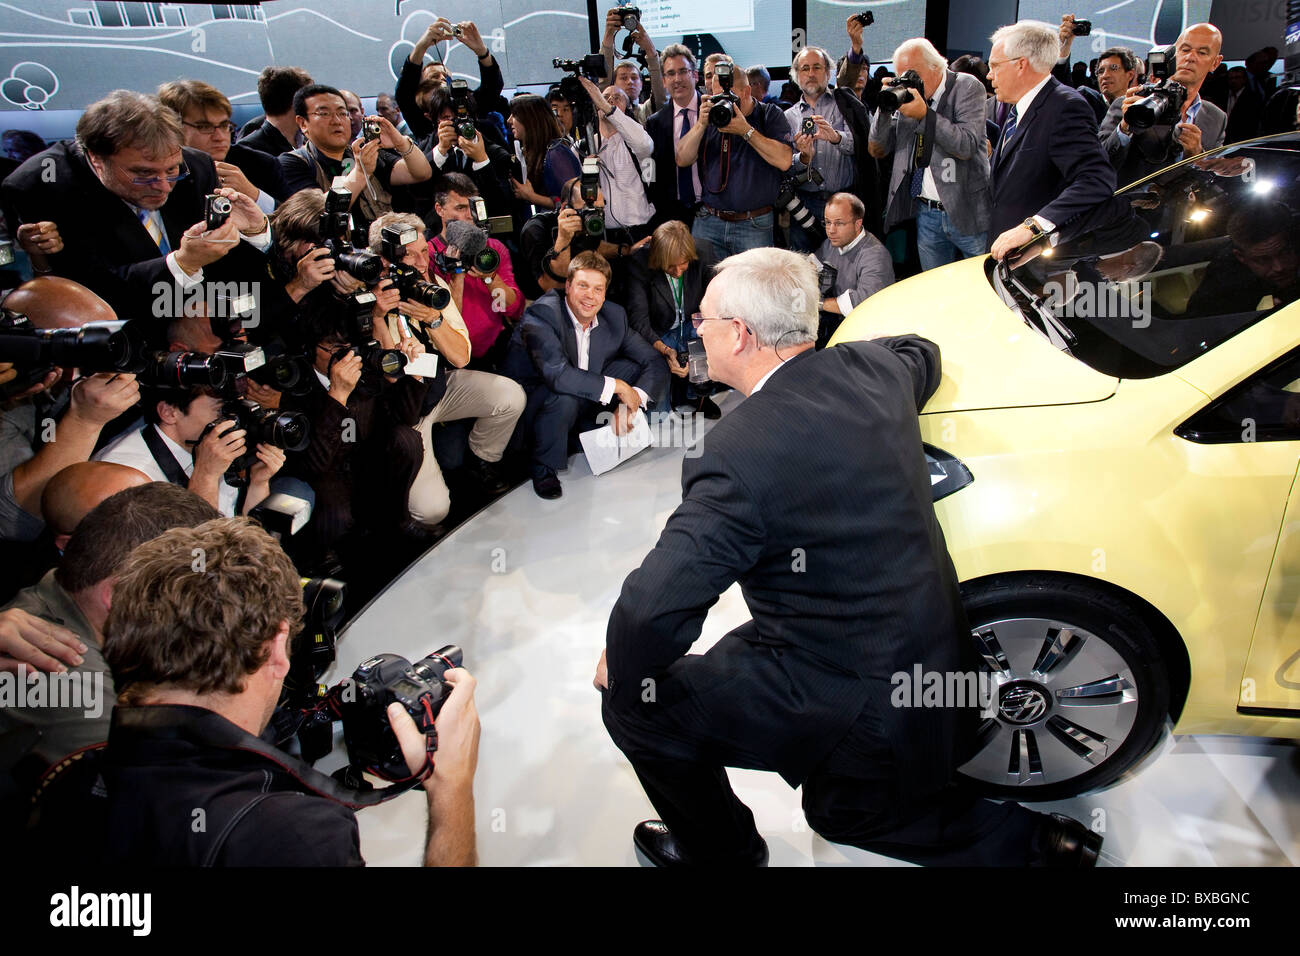 Martin Winterkorn, CEO of the Volkswagen AG company, presenting the study of the VW electric car e-up, during the Group Night of Stock Photo